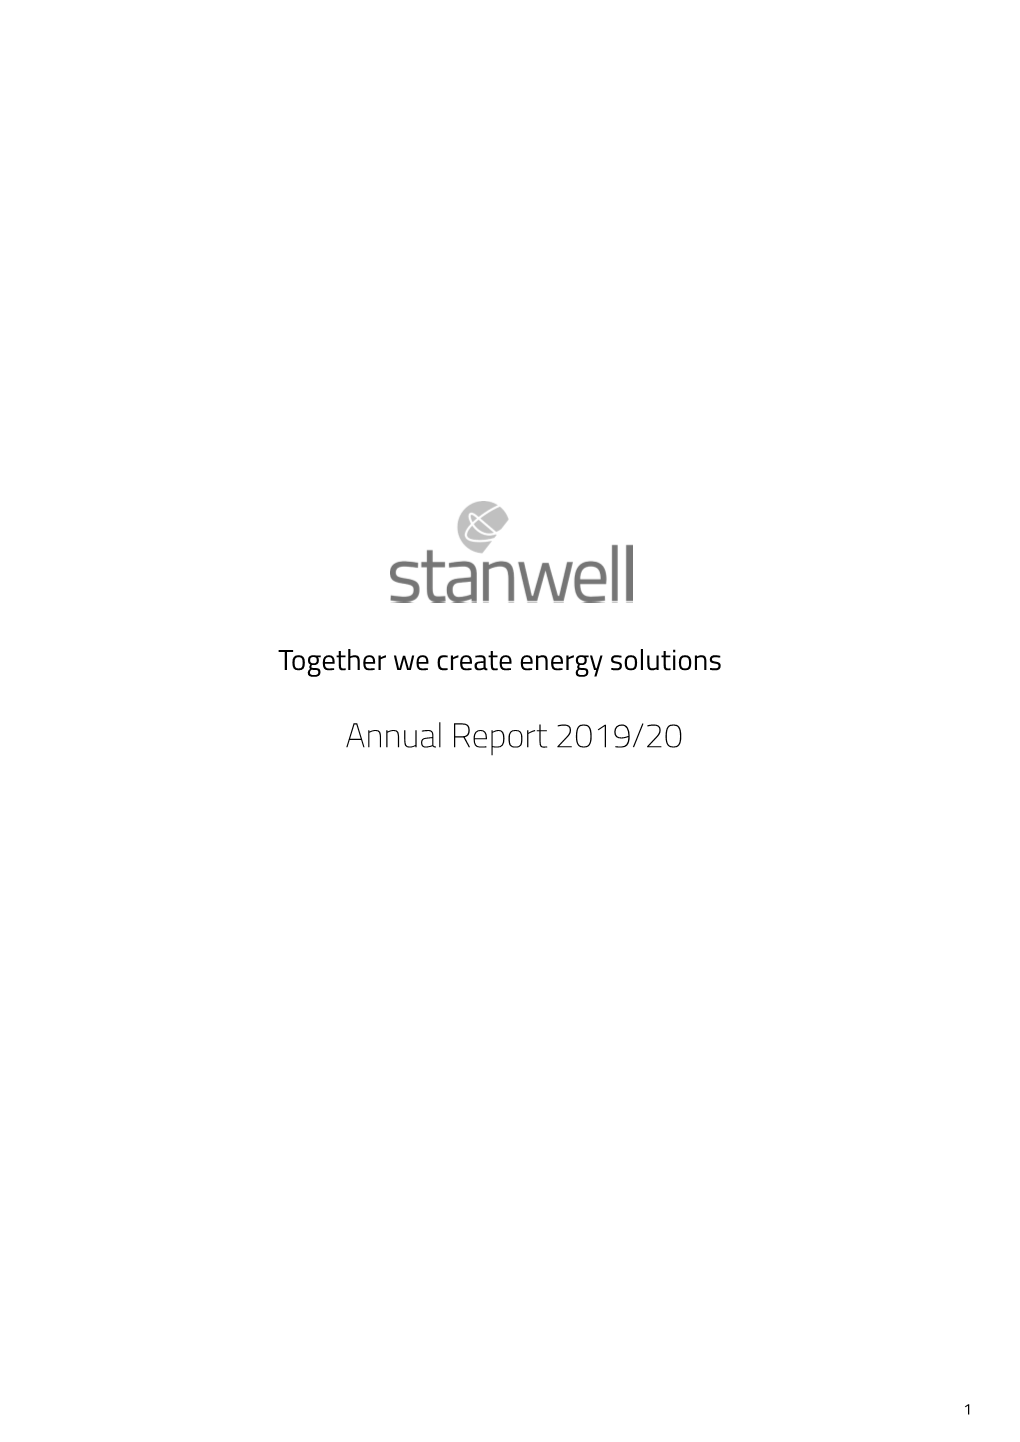 Stanwell Annual Report 2019/20 | Our Performance About Stanwell